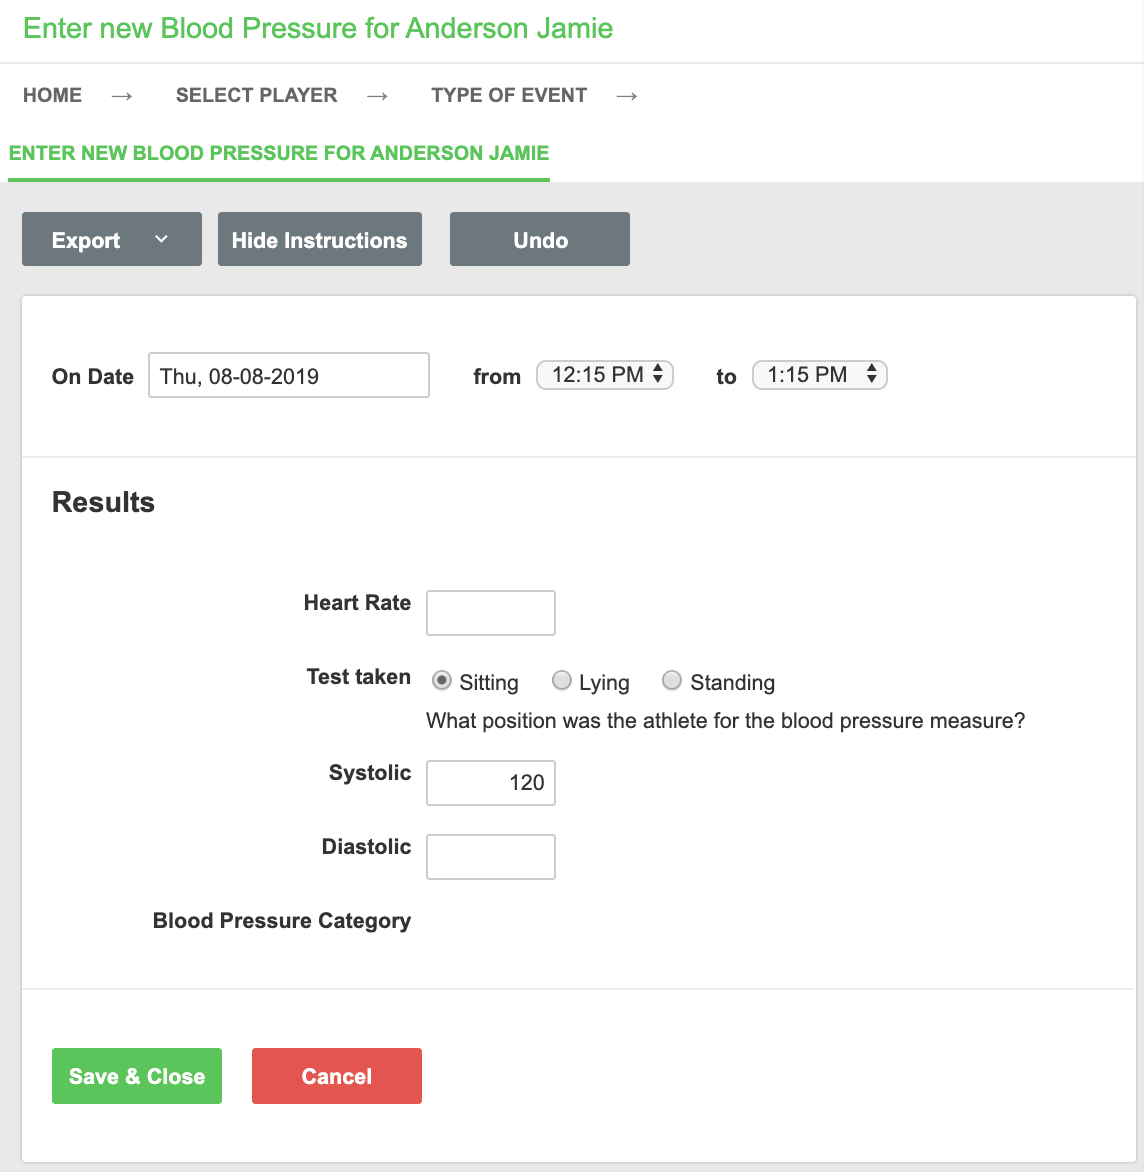 A screenshot of a simple Blood Pressure event form in Smartabase Online.